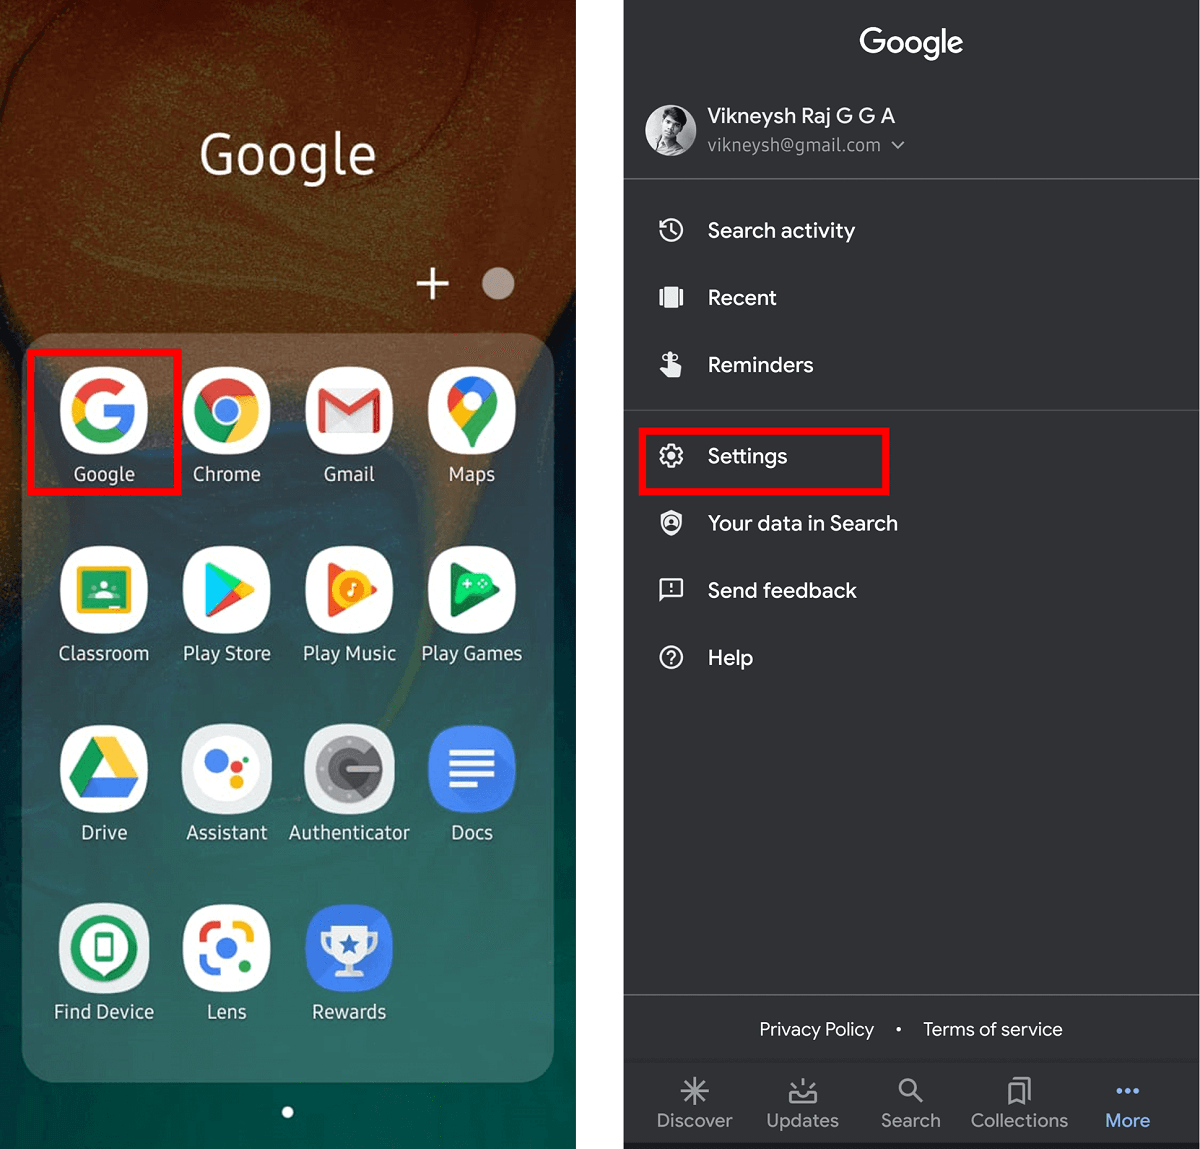 Open Google App then choose the More option then select Settings